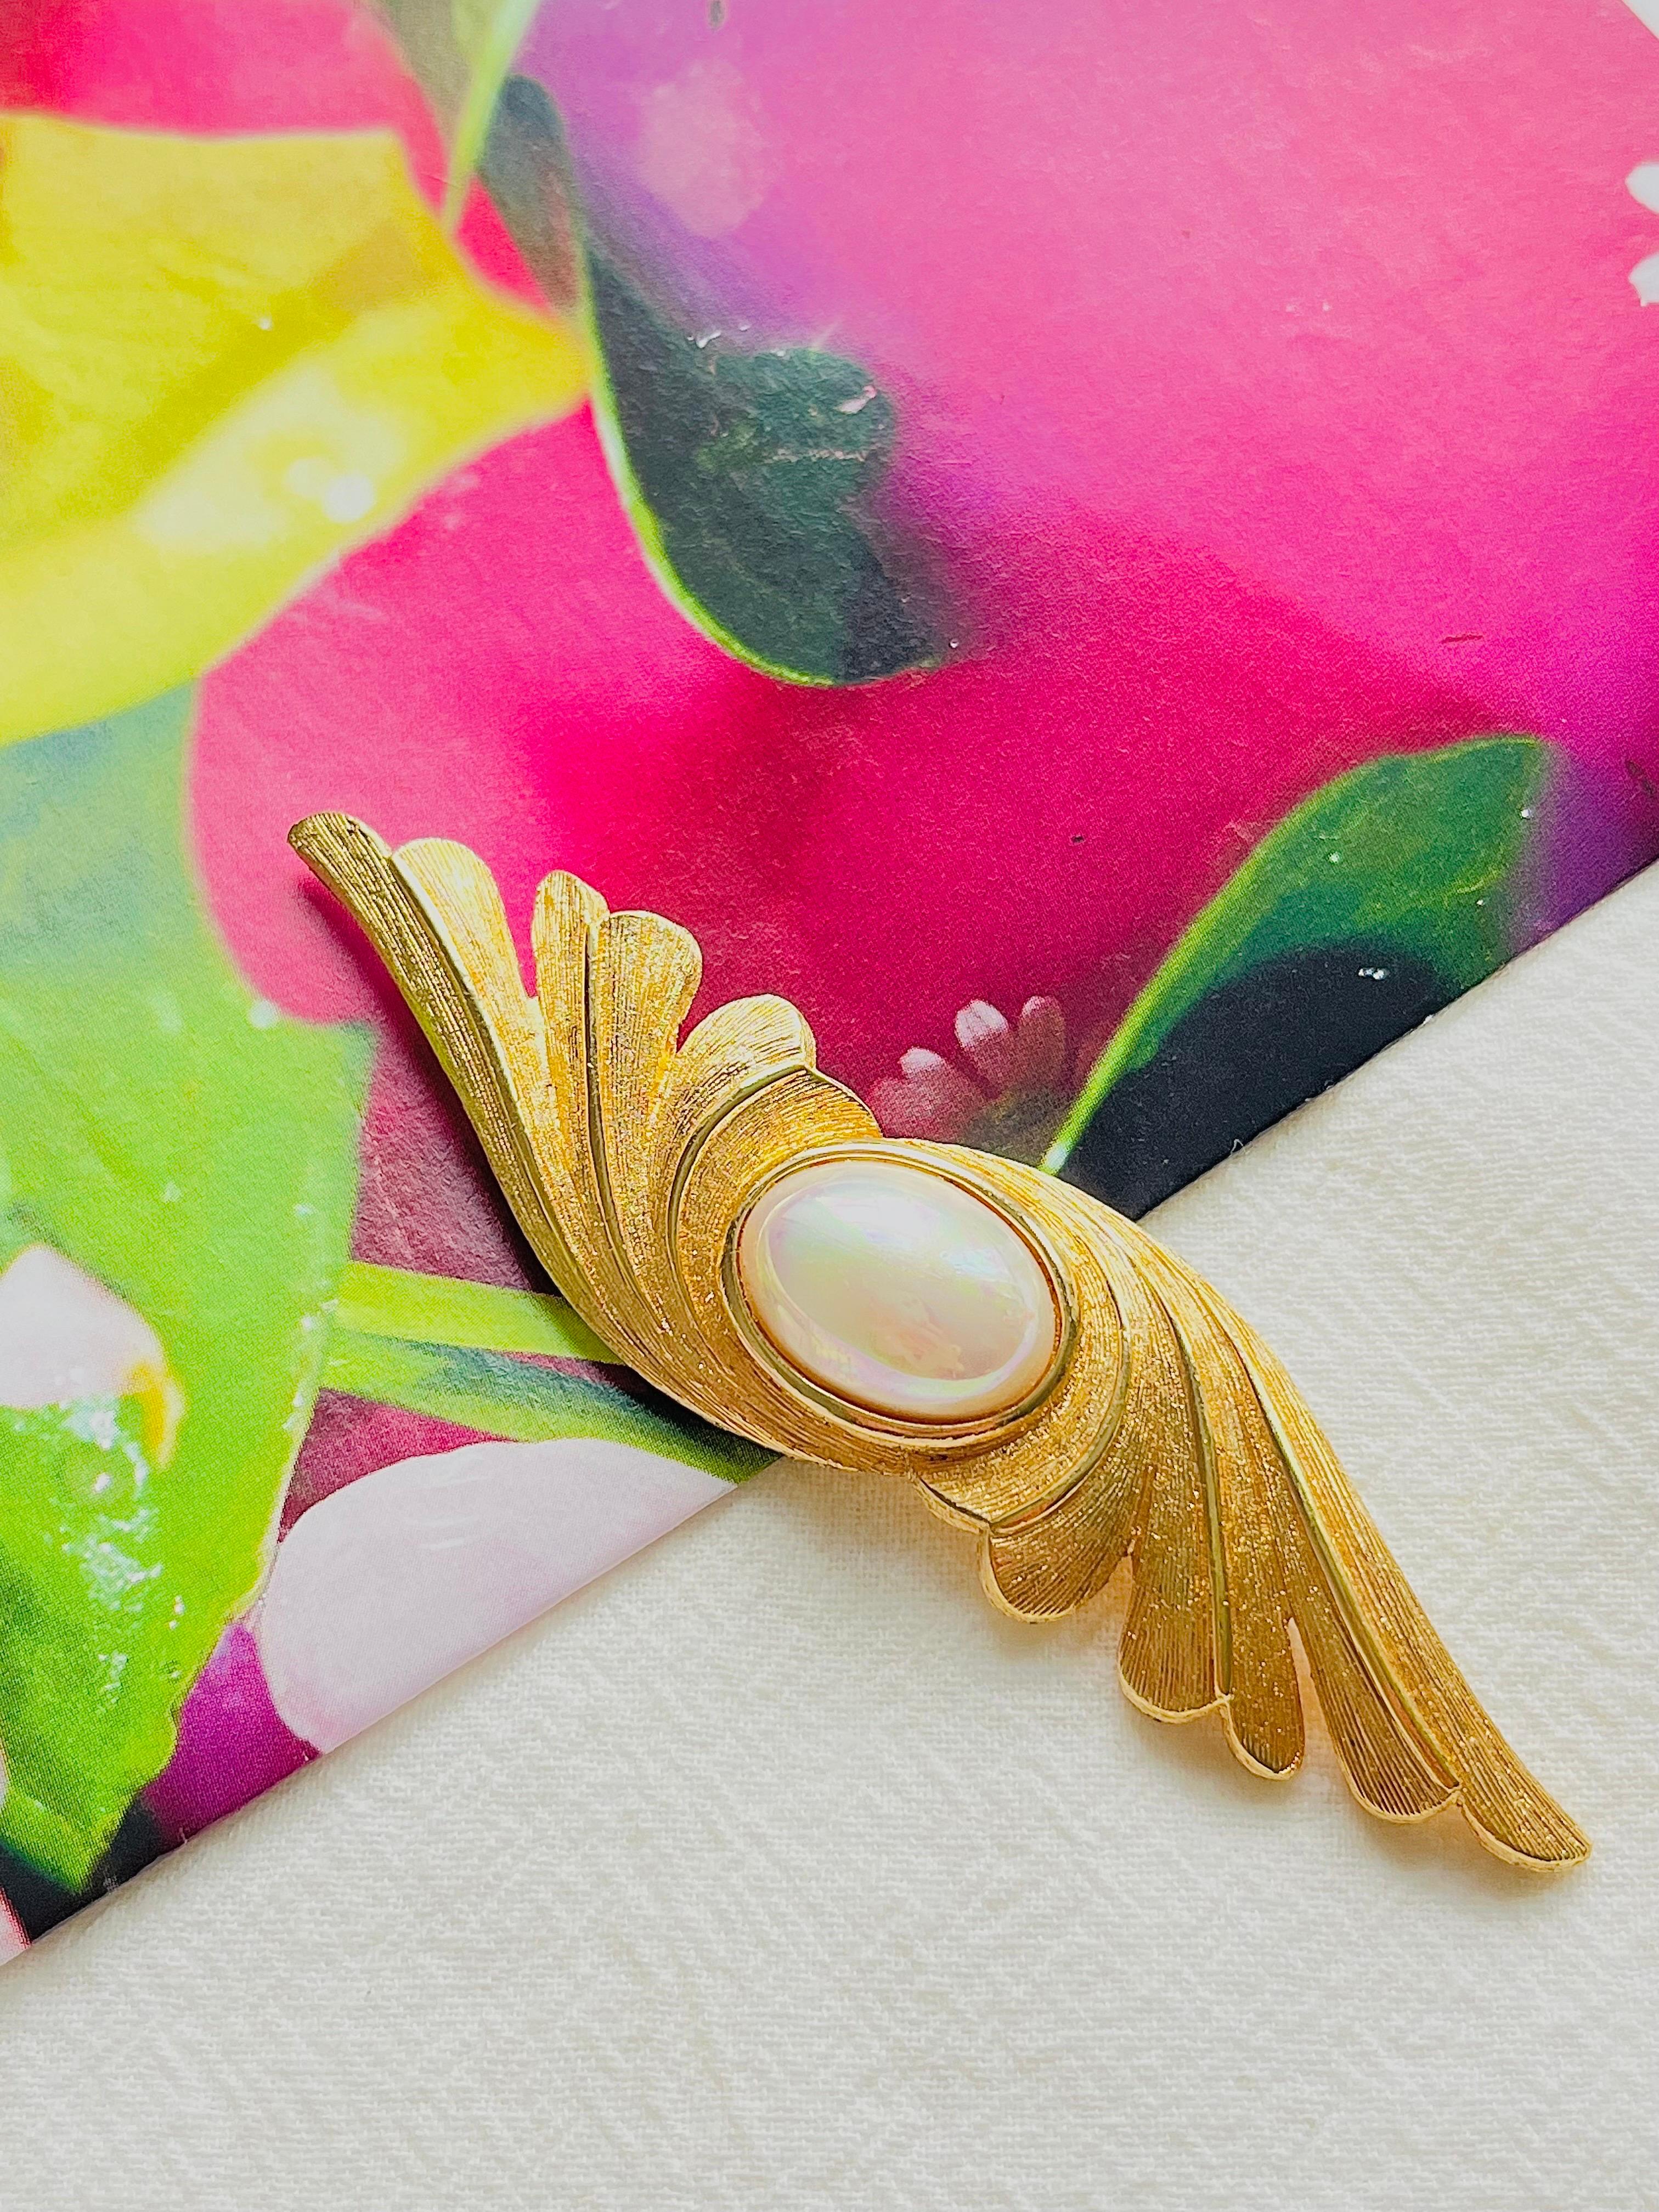 Christian Dior Vintage 1970s Oval Pearl Symmetric Feather Leaf Wing Brooch, Gold Tone

Very good condition. Light scratches or colour loss, barely noticeable. Signed at back.

A unique piece. Safety-catch pin closure.  100% genuine. Rare to